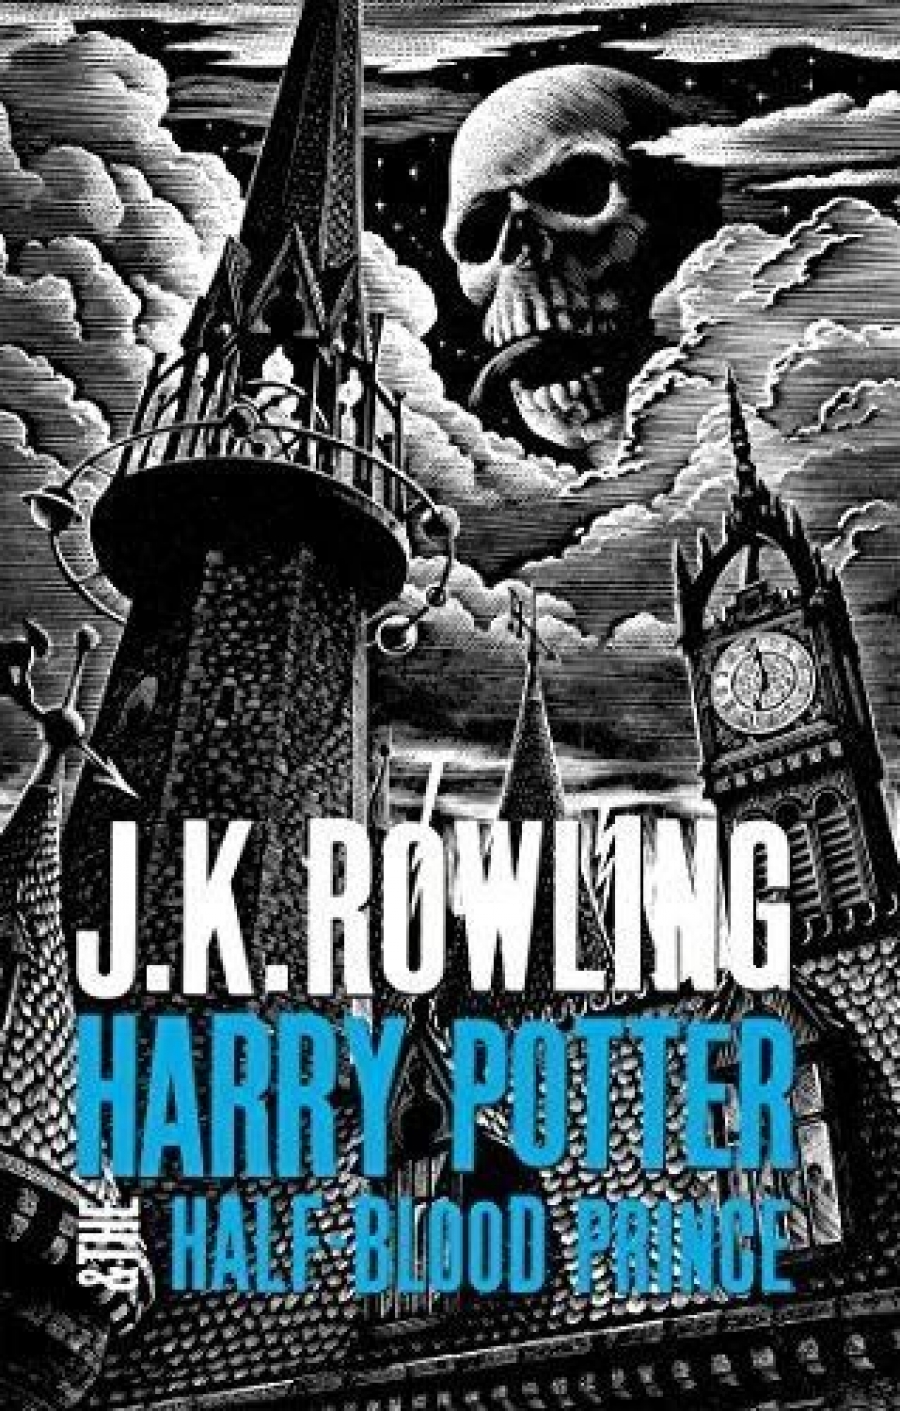 Rowling J.K. Harry Potter and the Half-Blood Prince 